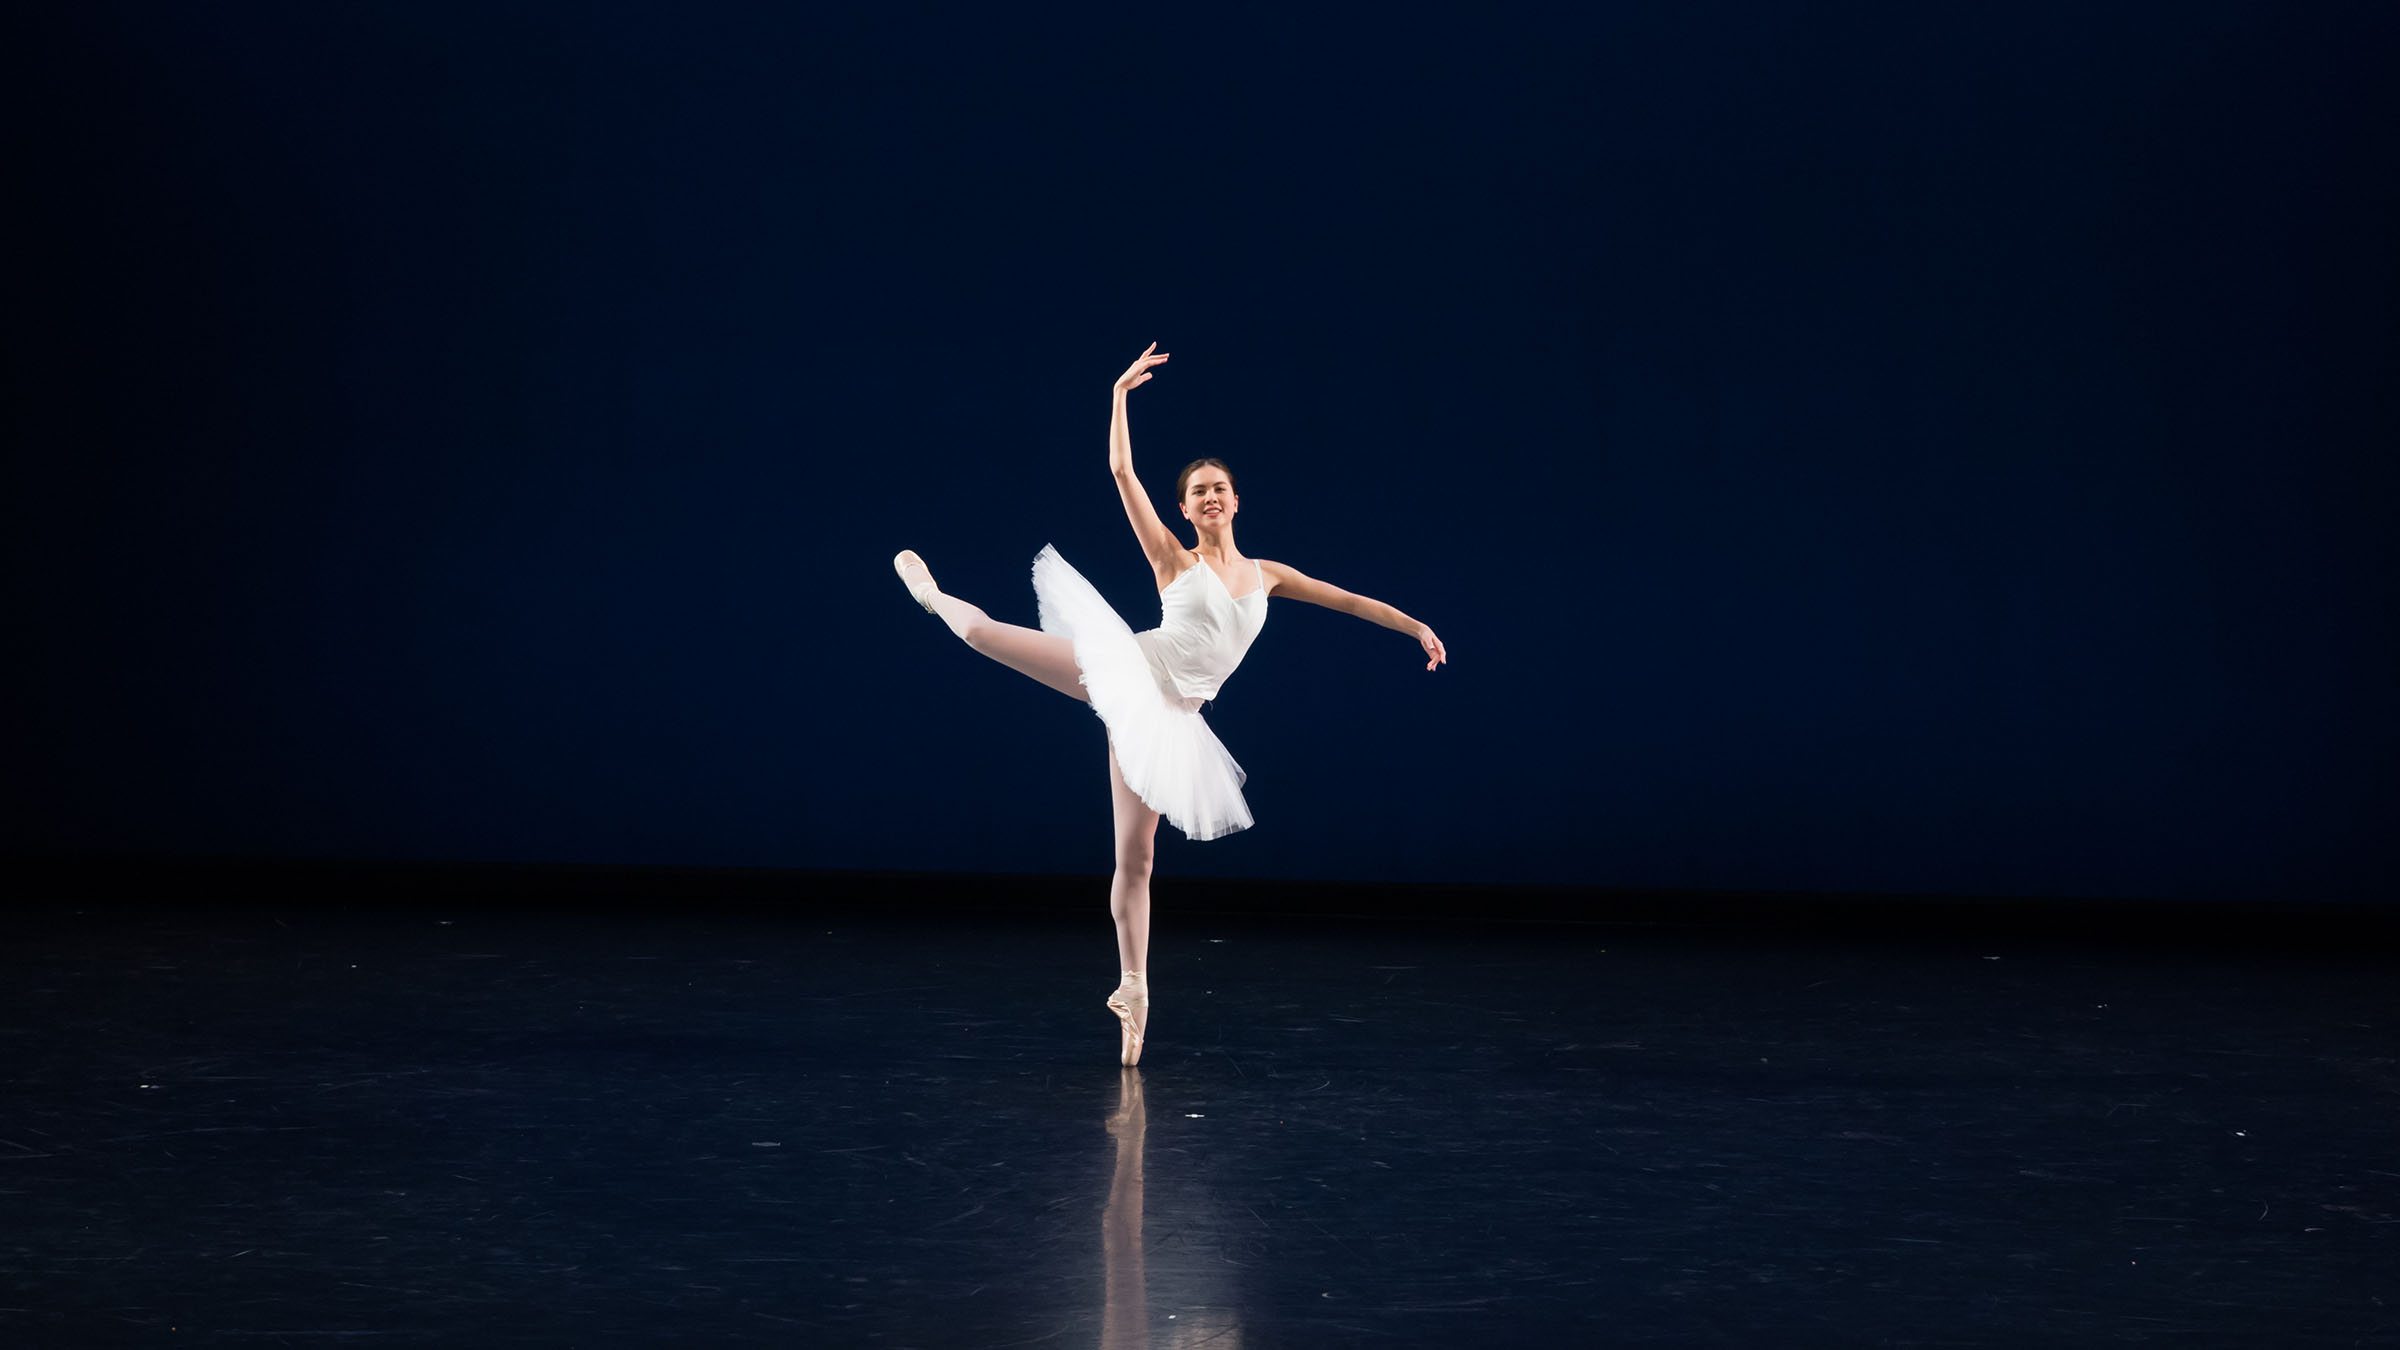 A person wearing a white ballet dress balances on one foot on a darkened stage. Photo by Mark Sugino.